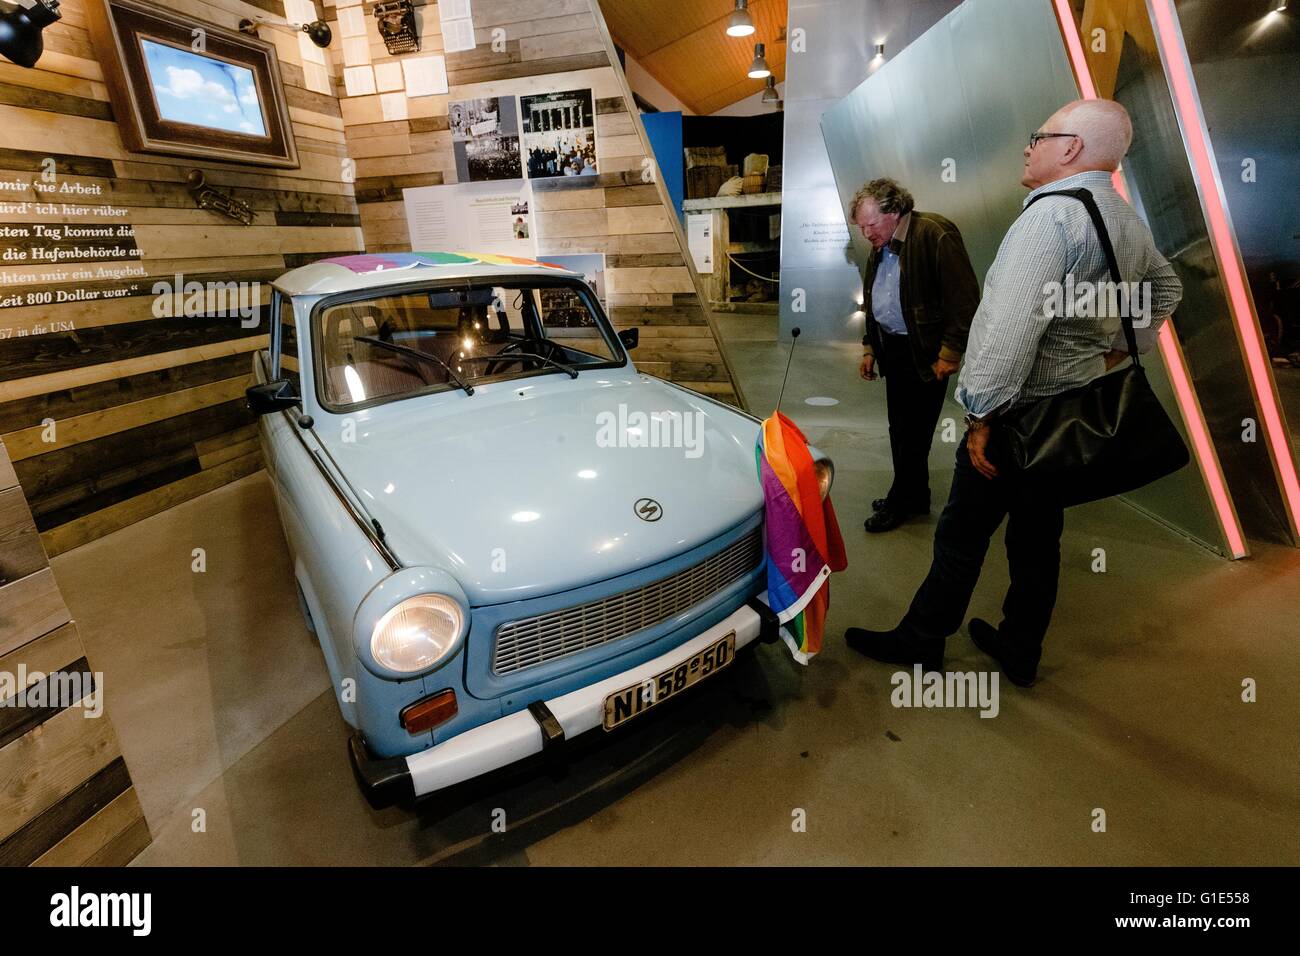 Hamburg, Germany. 13th May, 2016. Visitors looking at a Trabant car produced in the former GDR at the Auswanderermuseum (Emigration Museum) in Hamburg, Germany, 13 May 2016. Today, the museum reopens after a prolonged closure with a newly conceptualised exhibition. PHOTO: MARKUS SCHOLZ/dpa/Alamy Live News Stock Photo